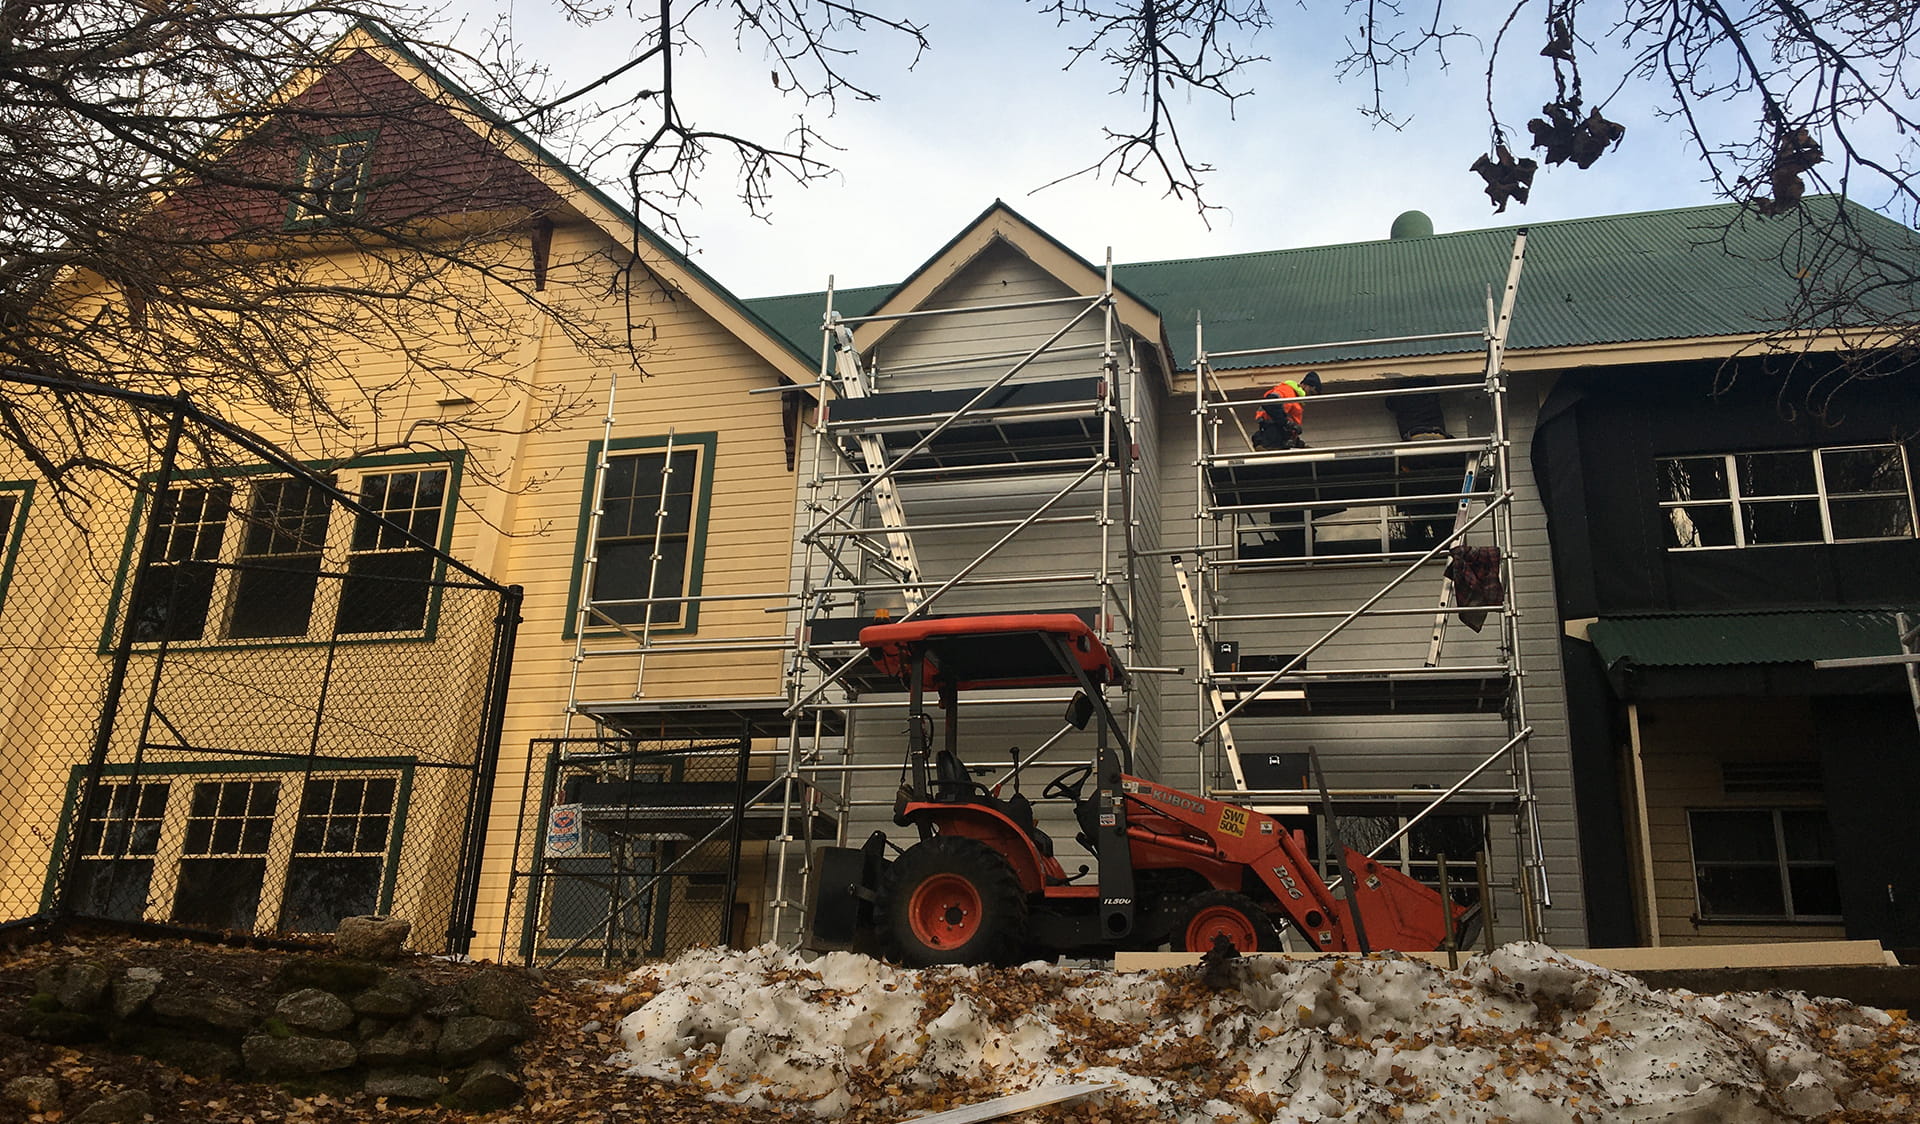 Maintenance works at Mount Buffalo Chalet - re-cladding of the kitchen wall, 6 May 2020.